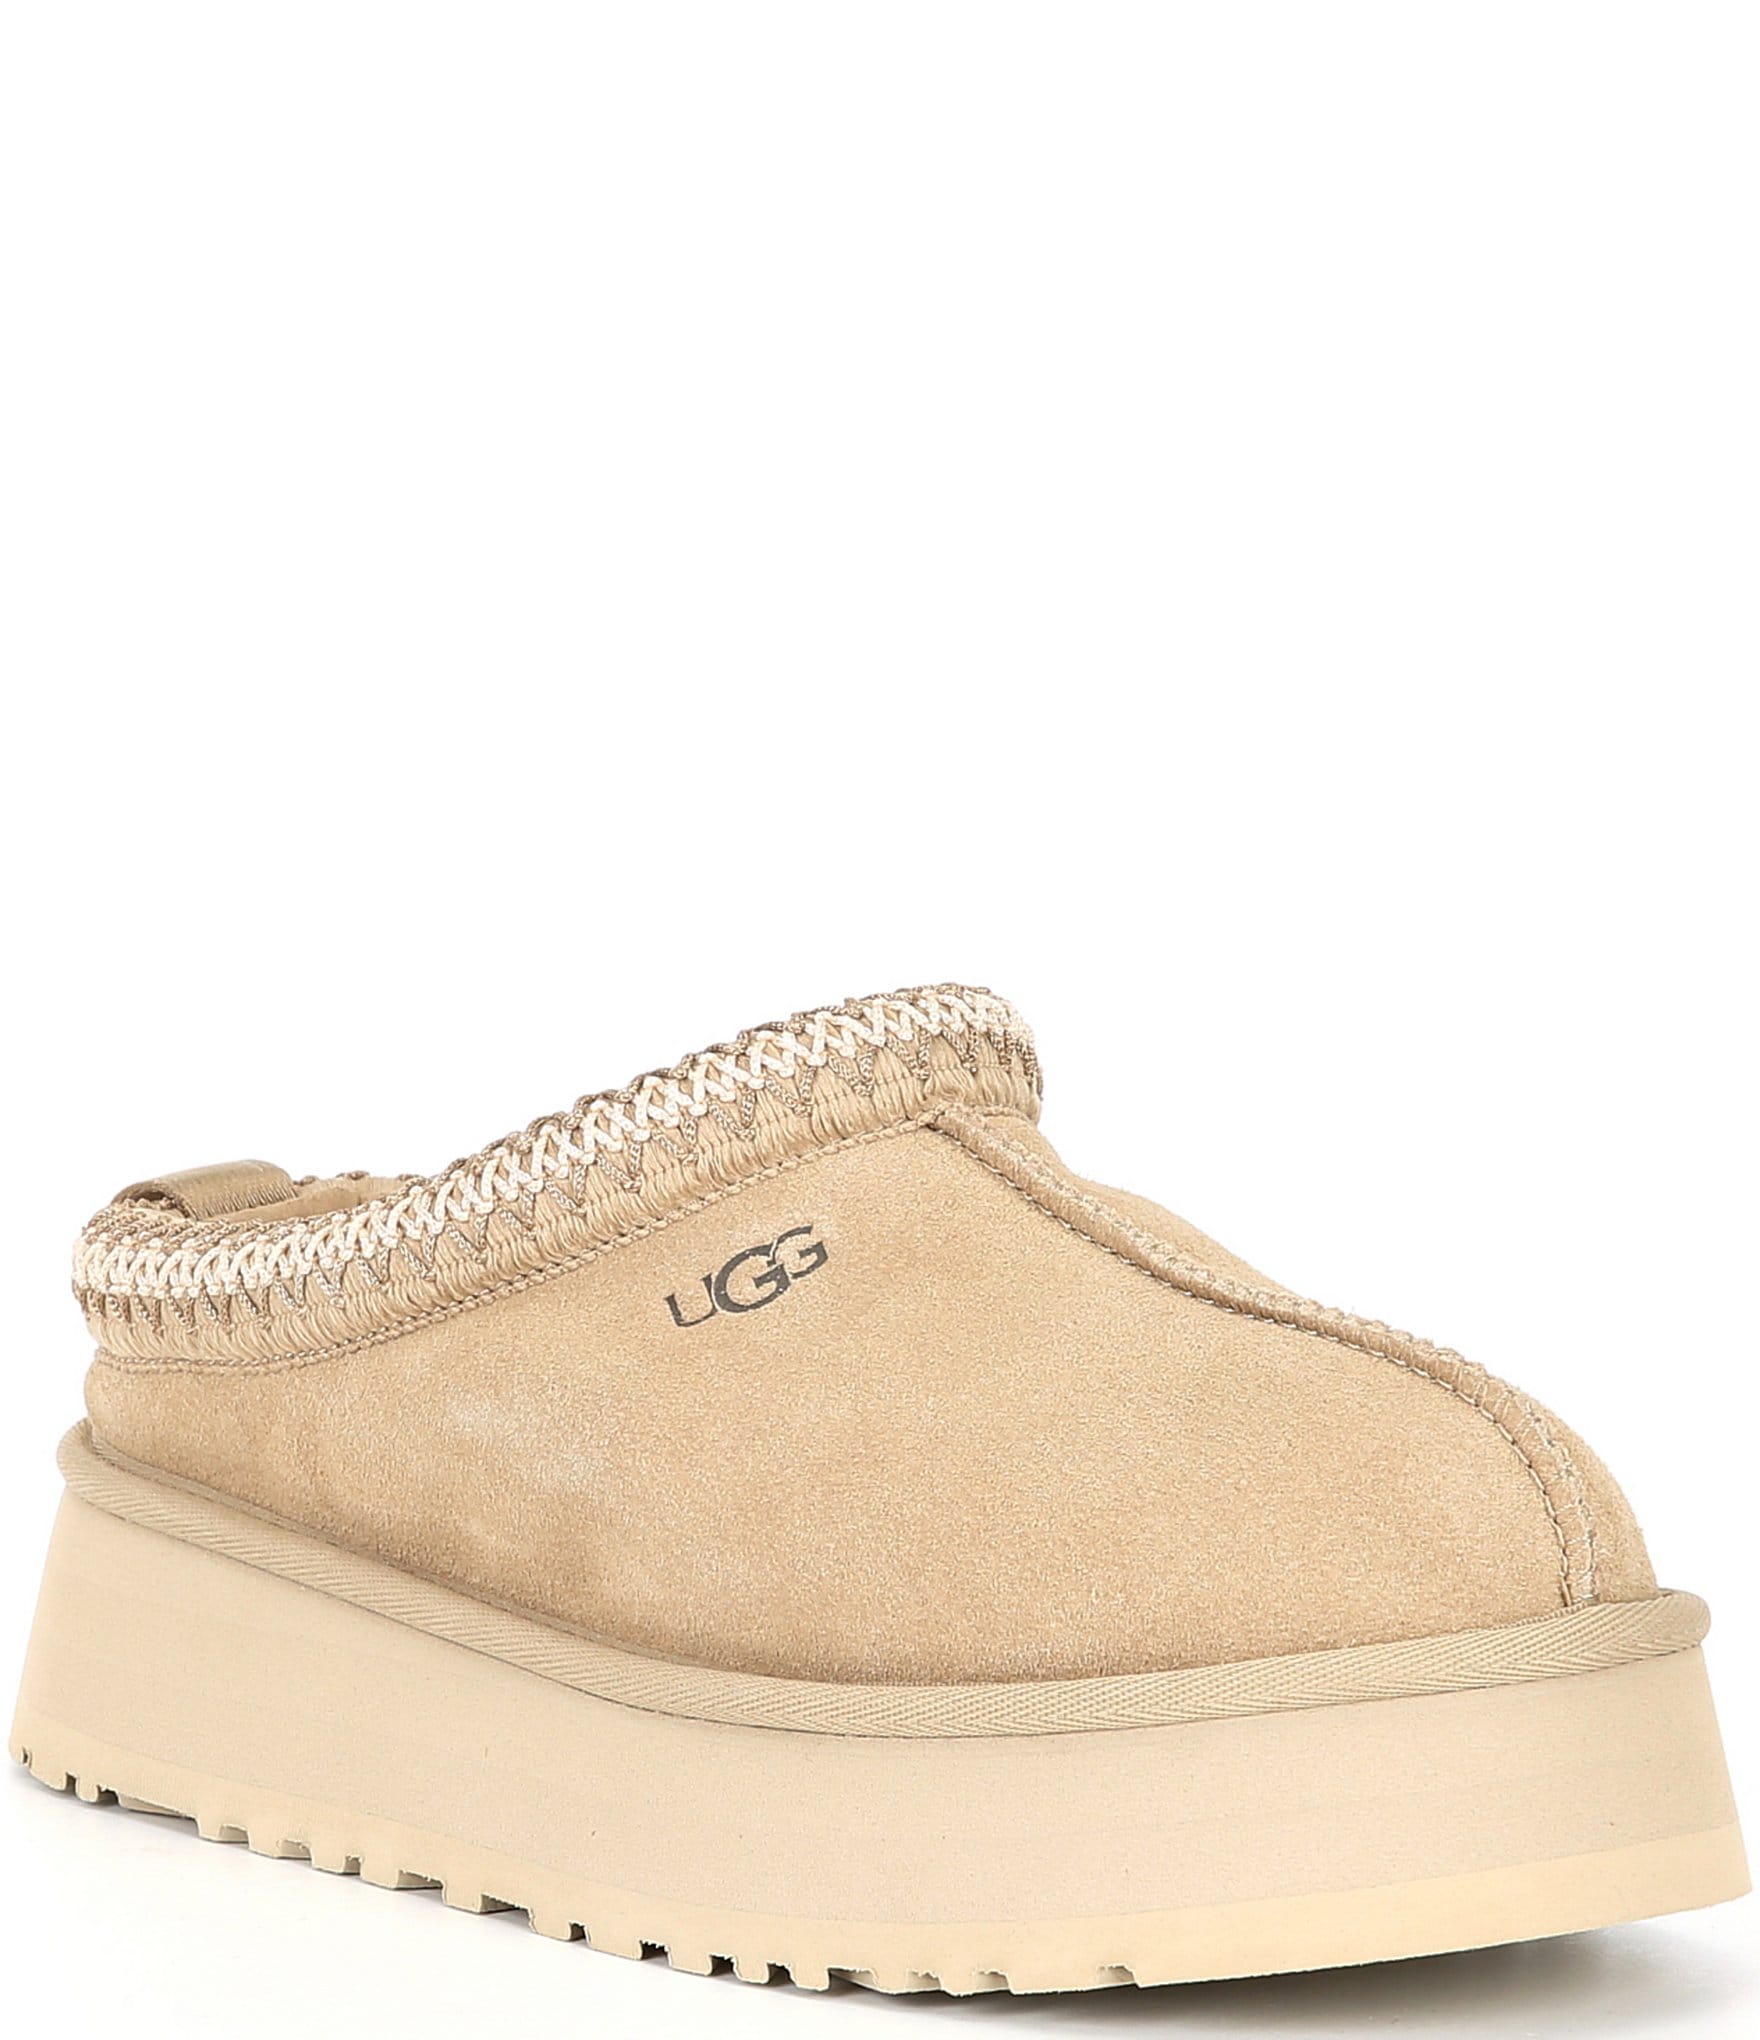 Ugg Classic Suede Slippers | ppgbbe.intranet.biologia.ufrj.br